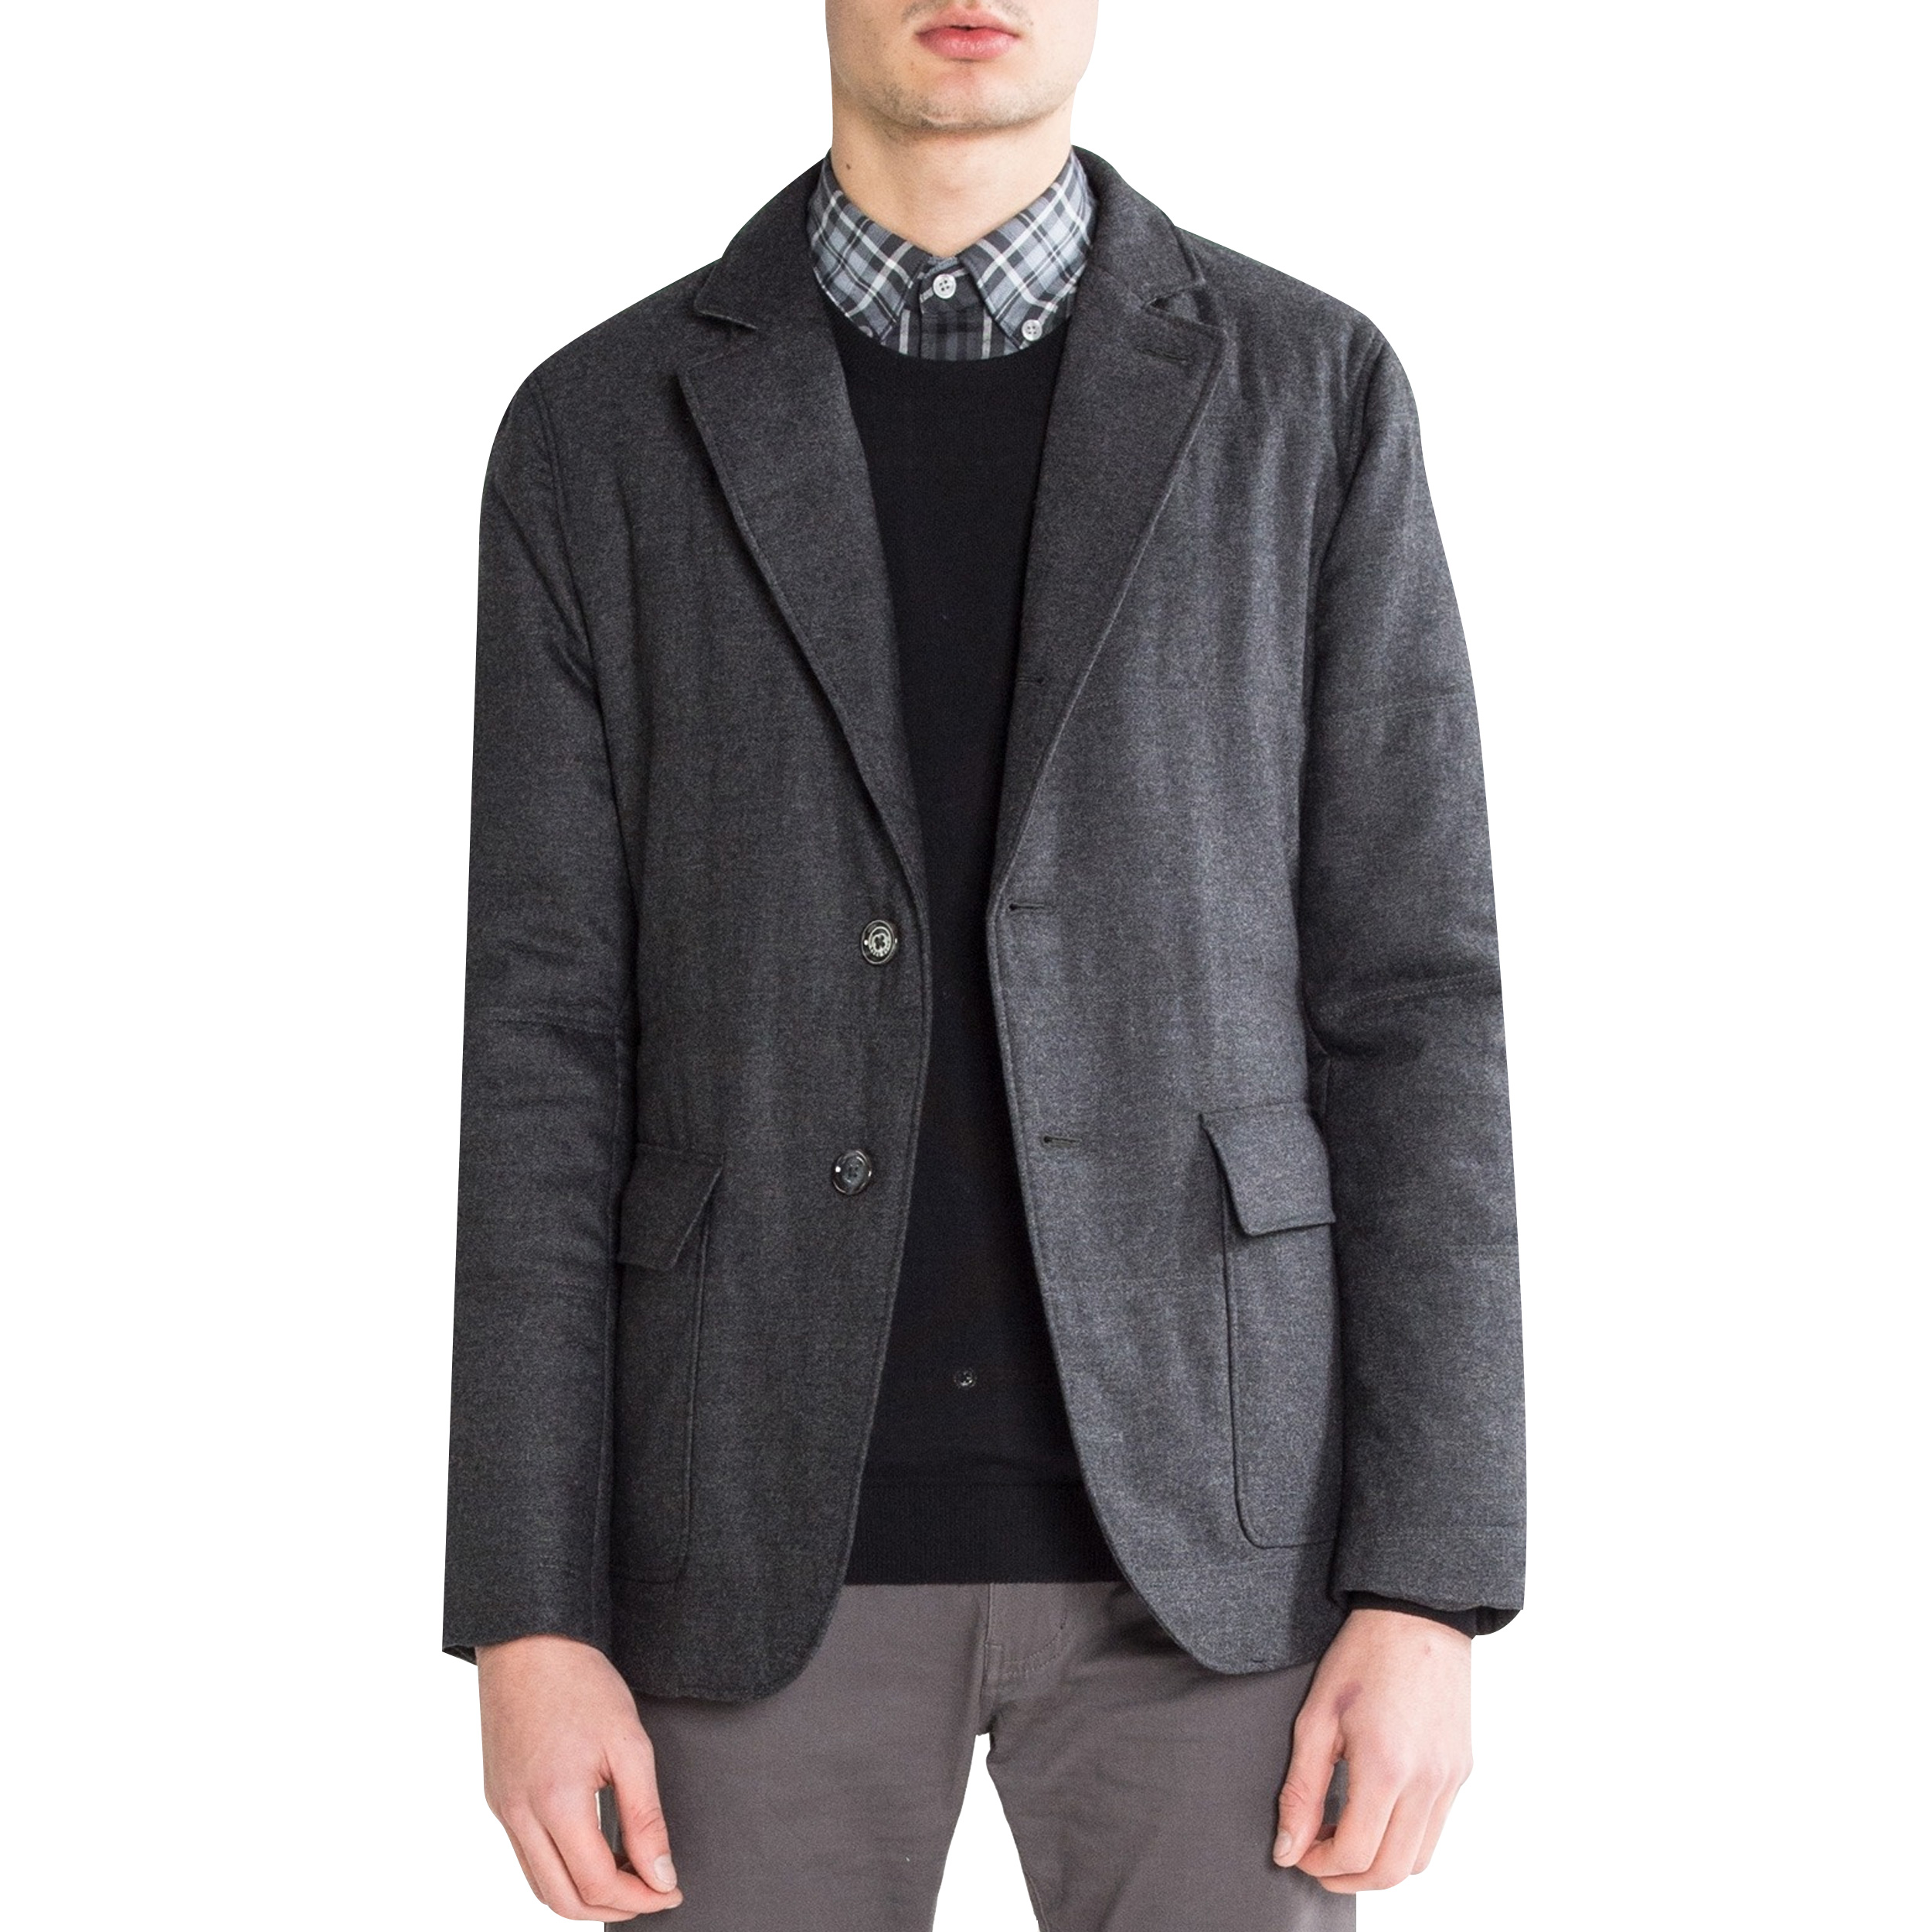 Hugo Boss ’T-Niklaas1’ Tailored Quilted Blazer Charcoal